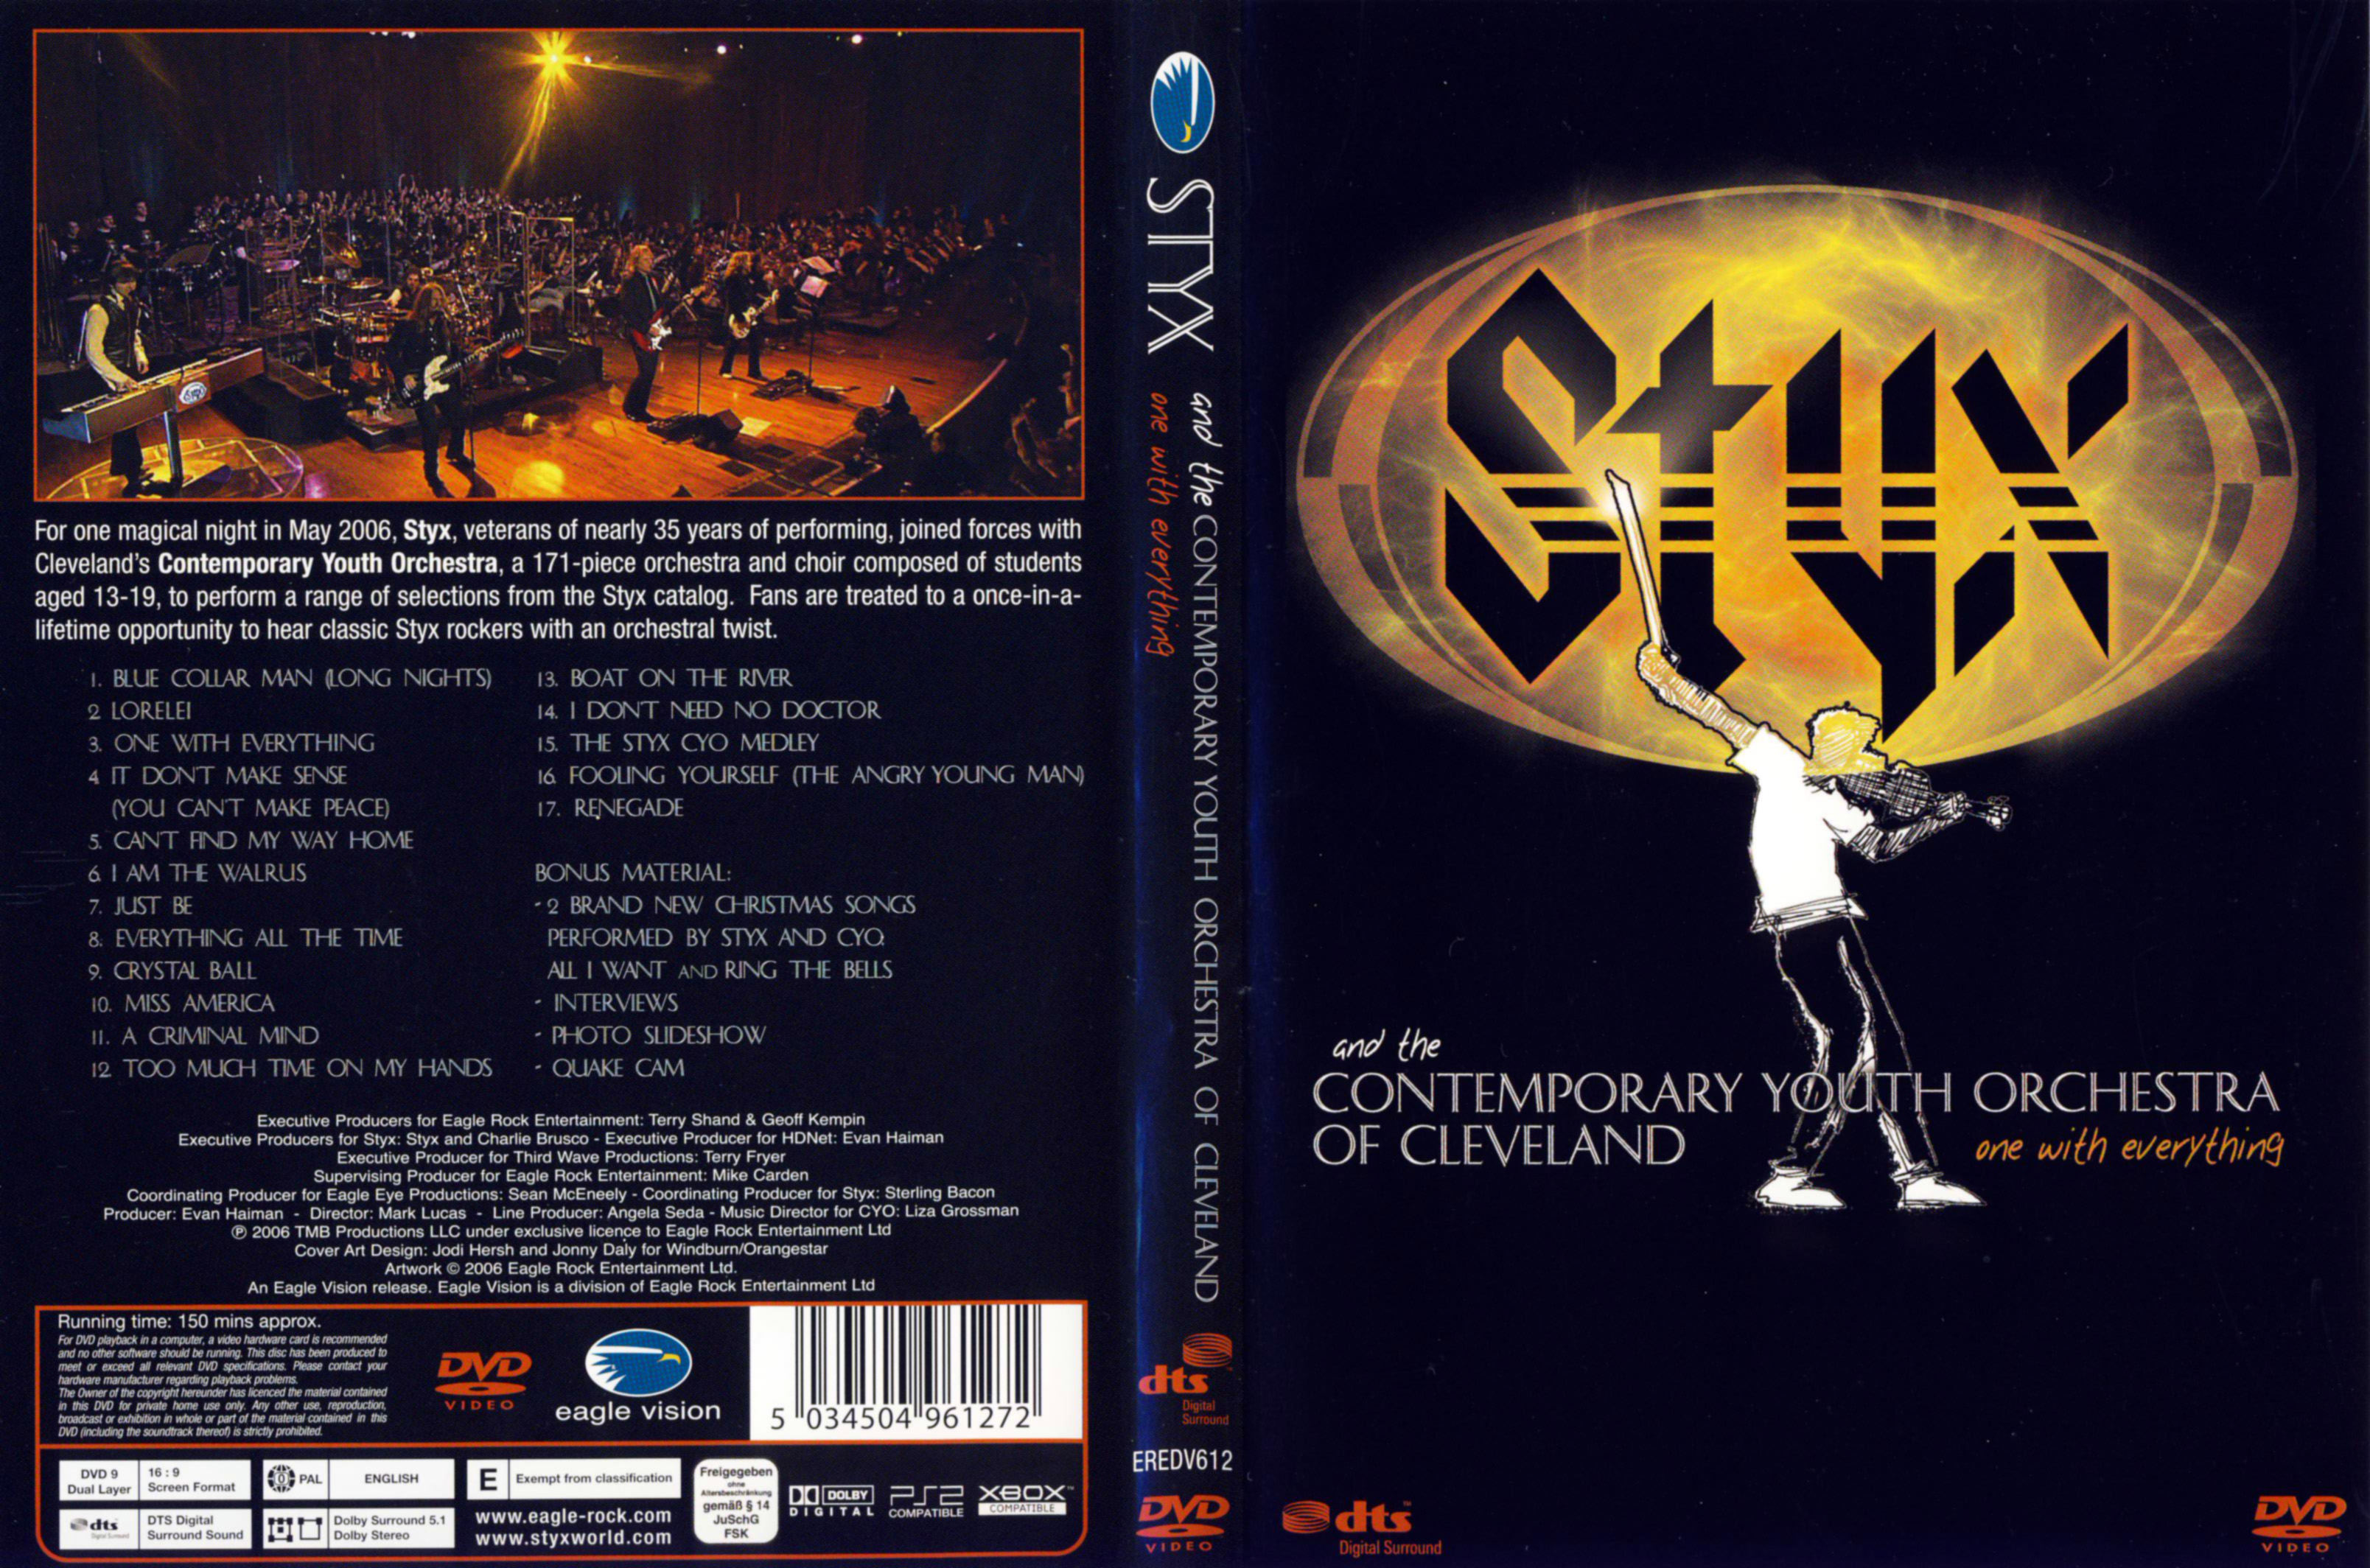 Jaquette DVD Styx and the Contemporary youth orchestra of Cleveland